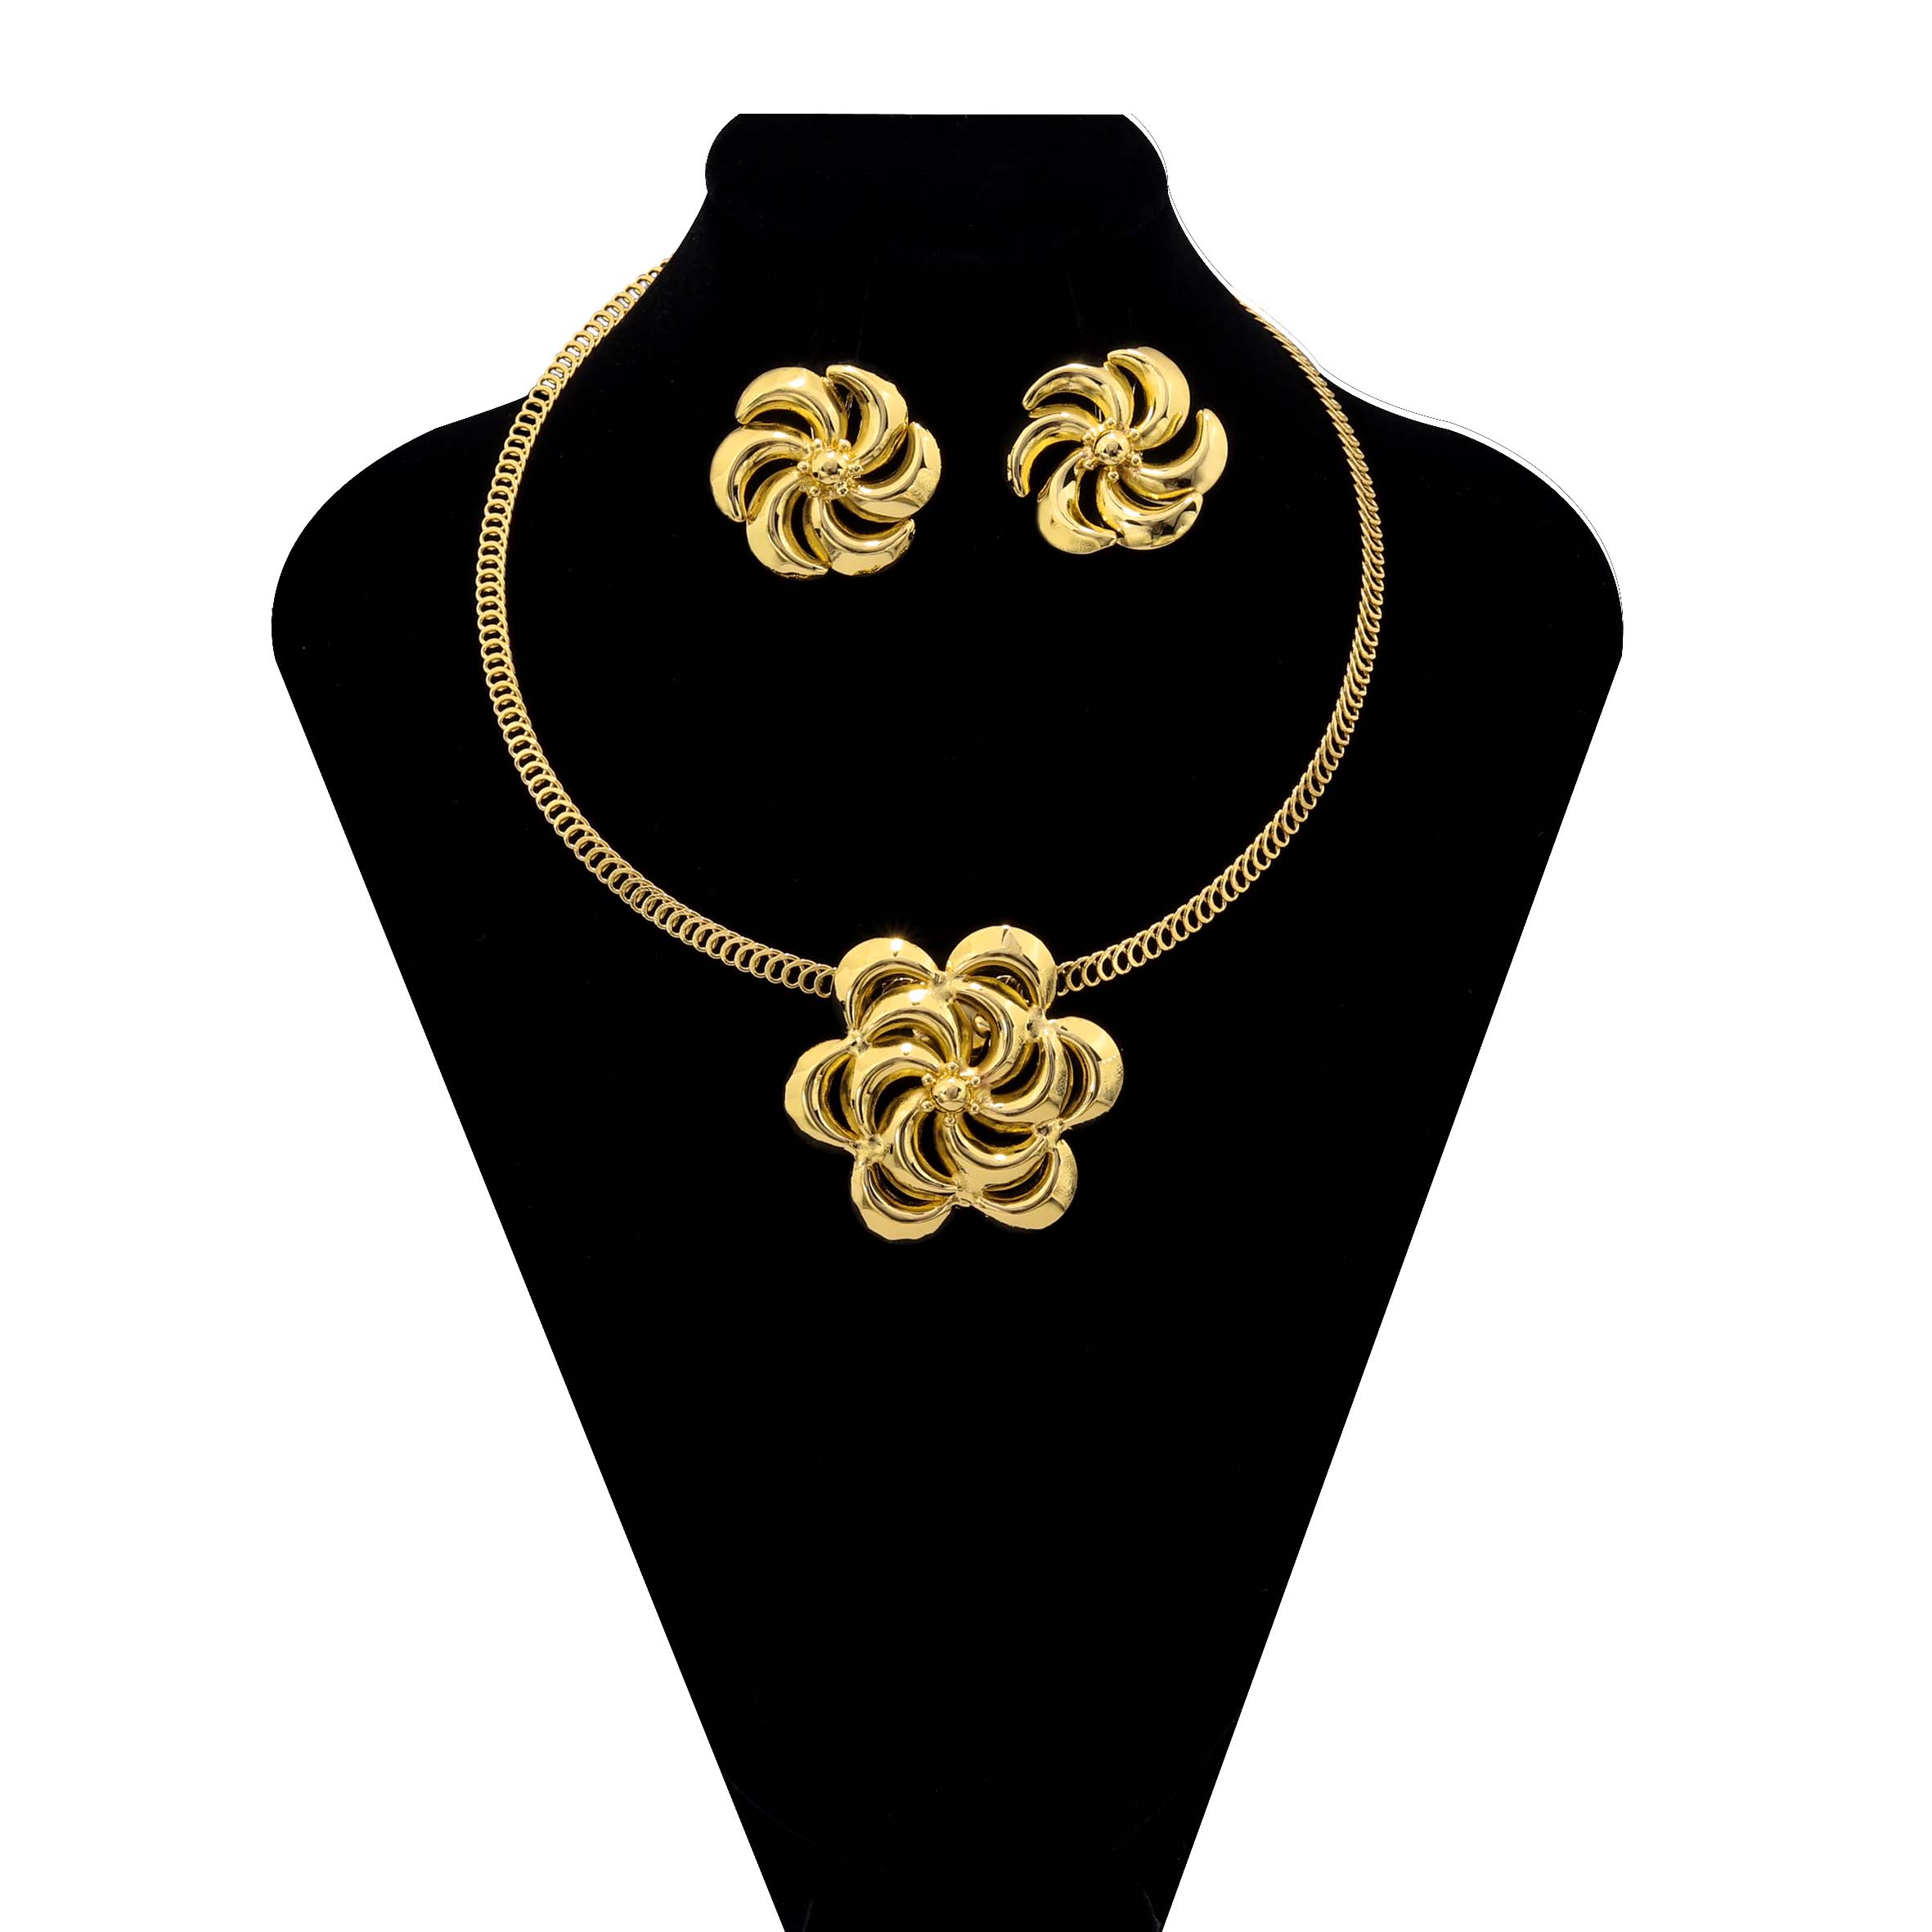 Luxurious 24k Gold Plated Big Flower Necklace Earrings Jewelry Set